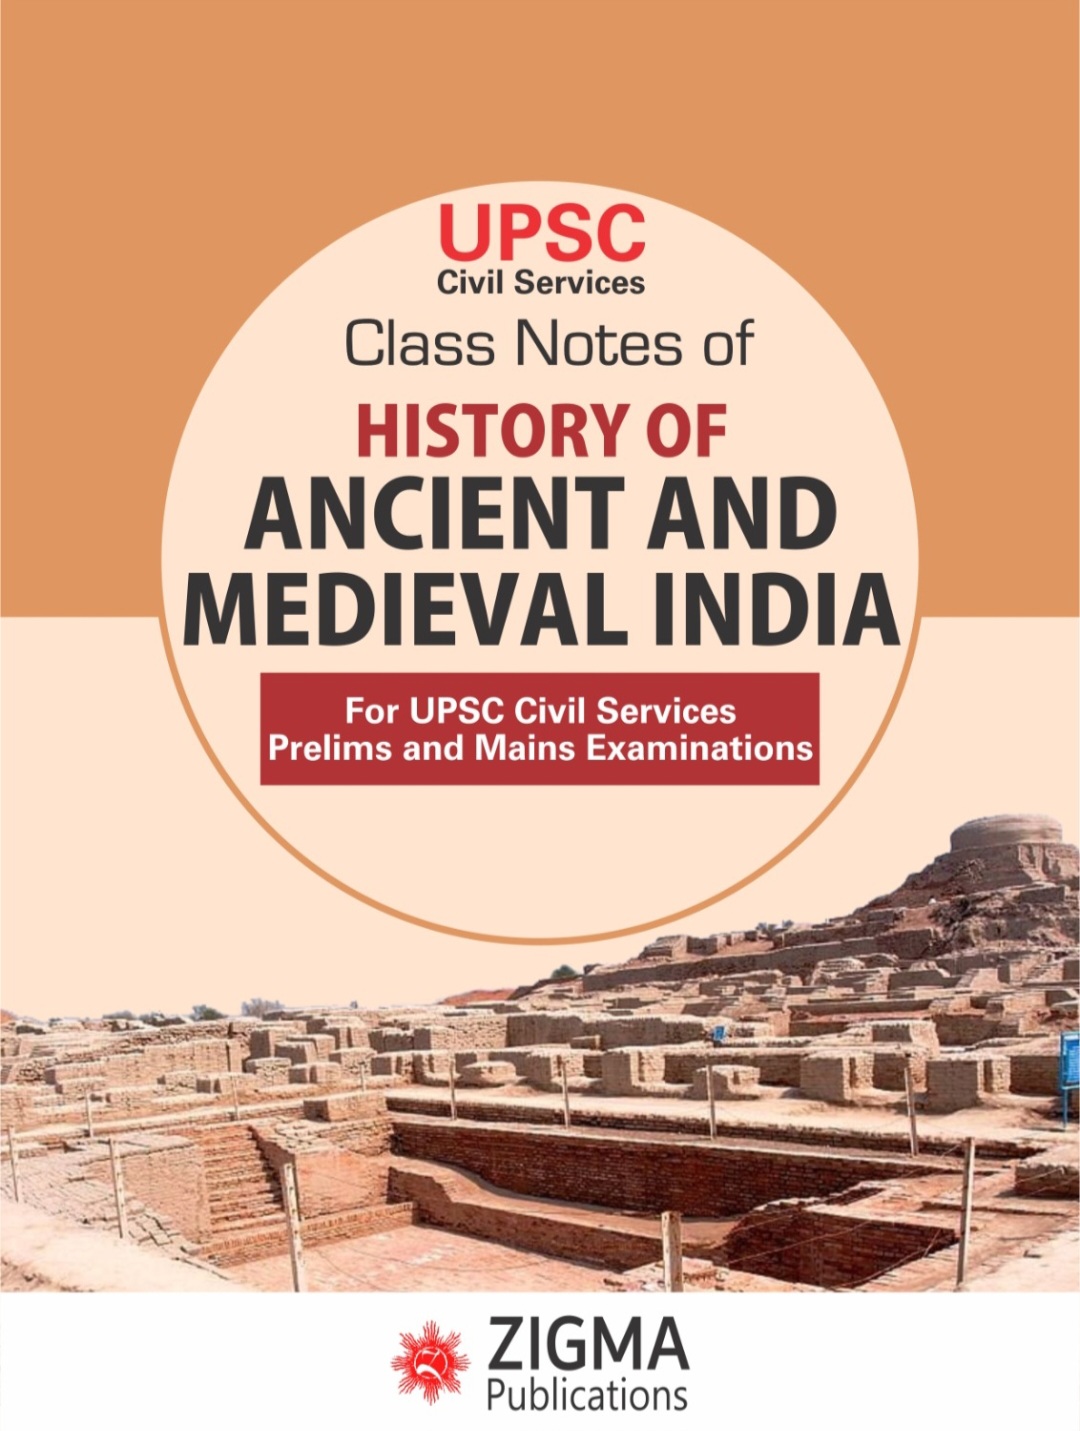 History of Ancient and Medieval India Class notes for UPSC civil services & prelims & mains exam